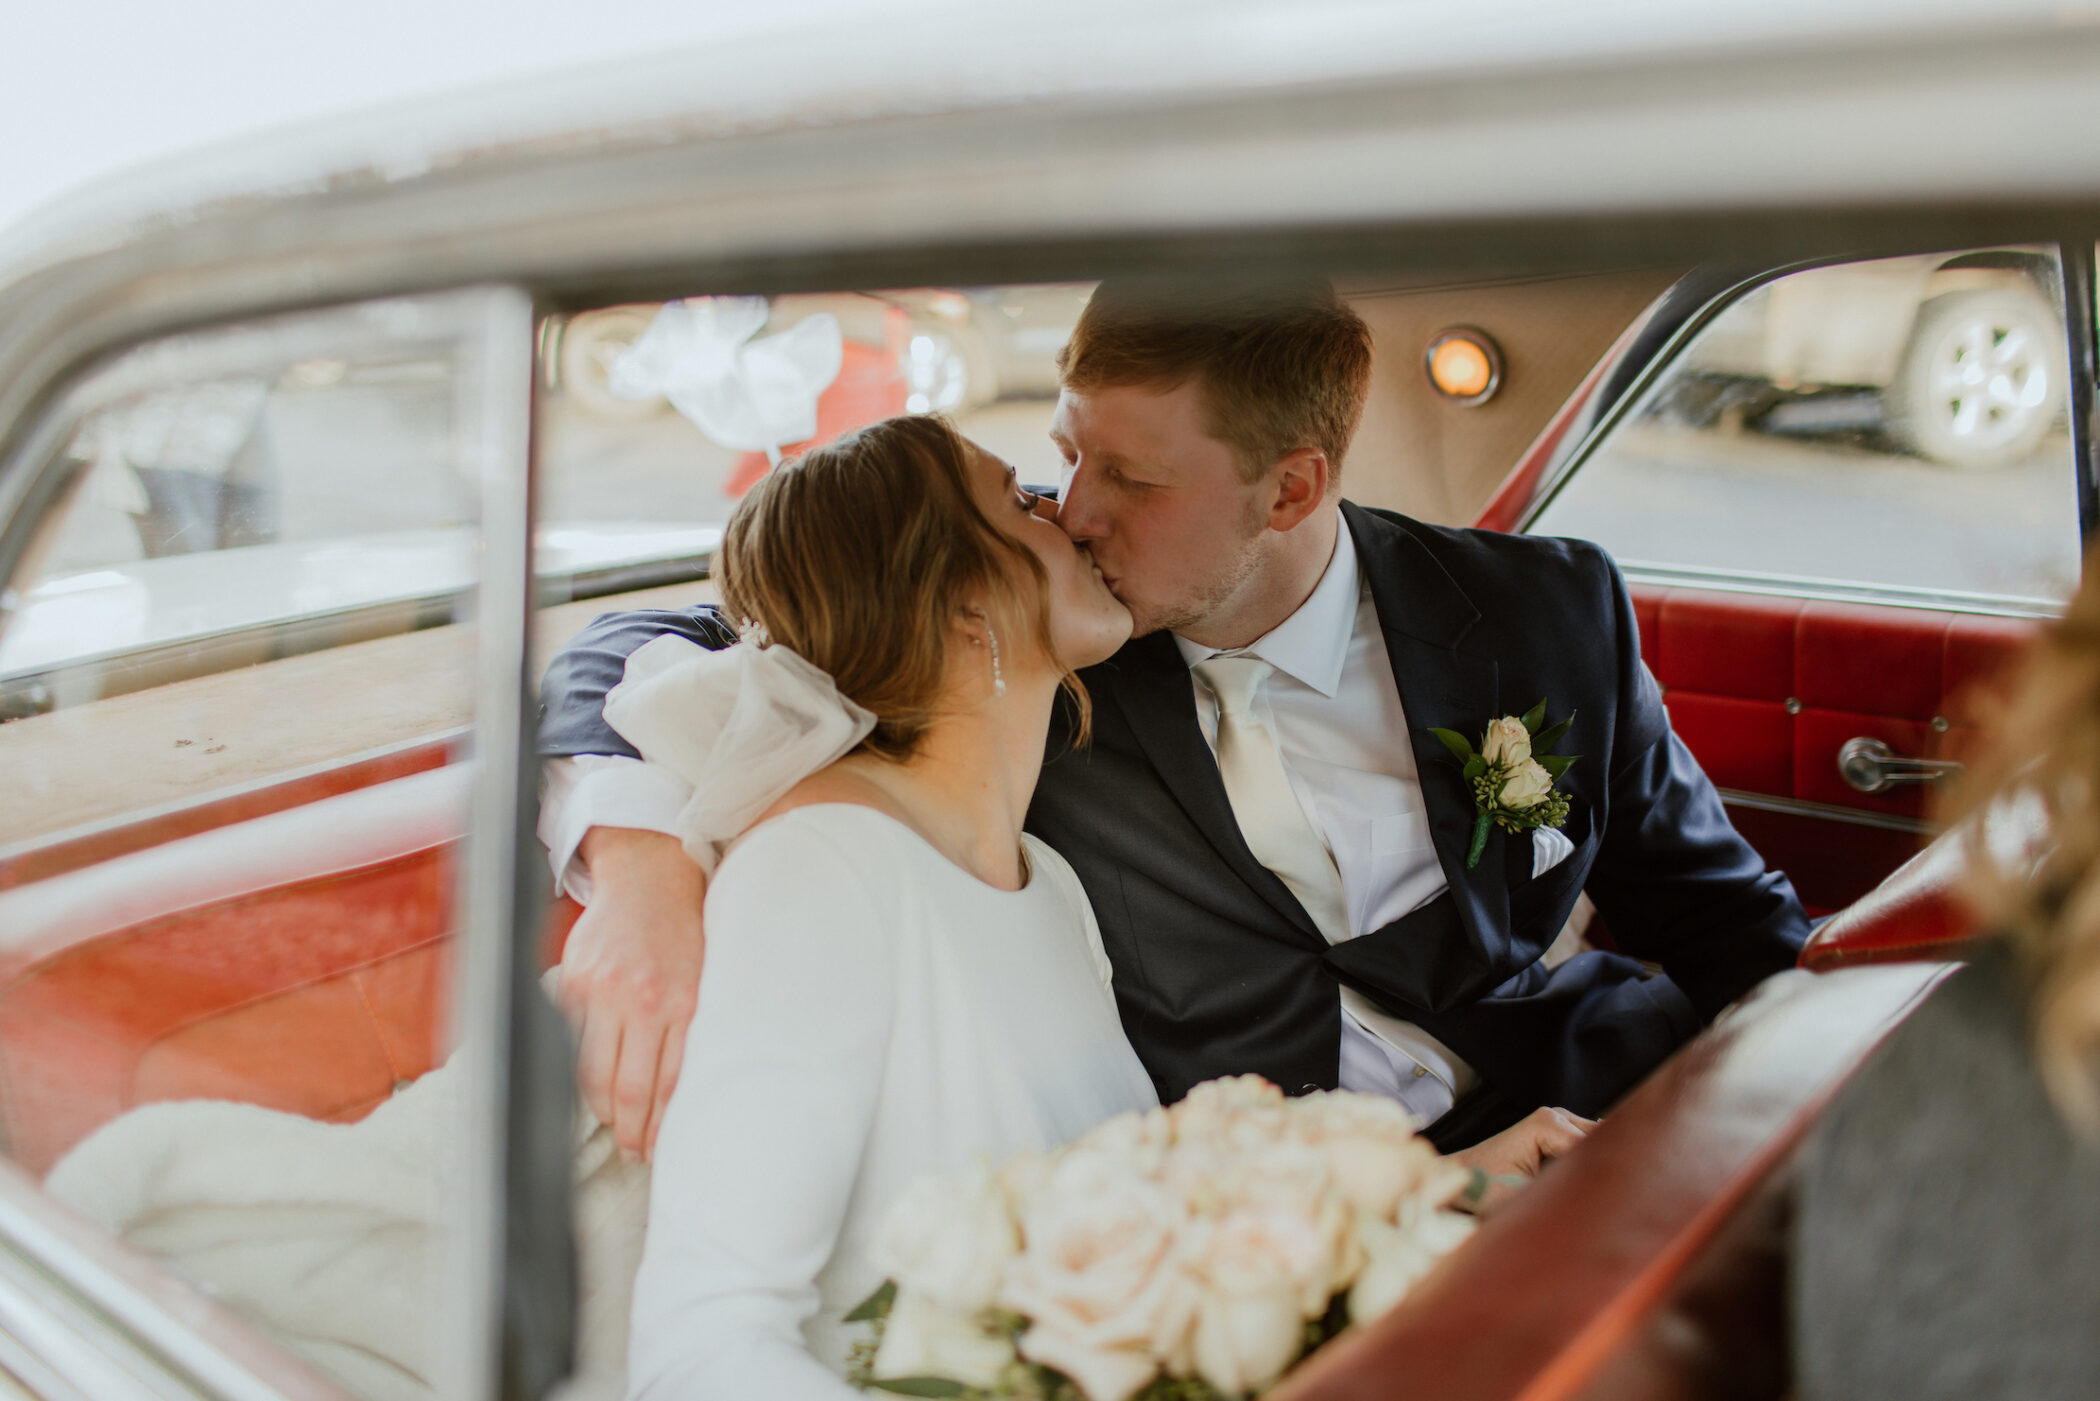 bride and groom kissing in car after wedding photographer associate captures the moment on their special day